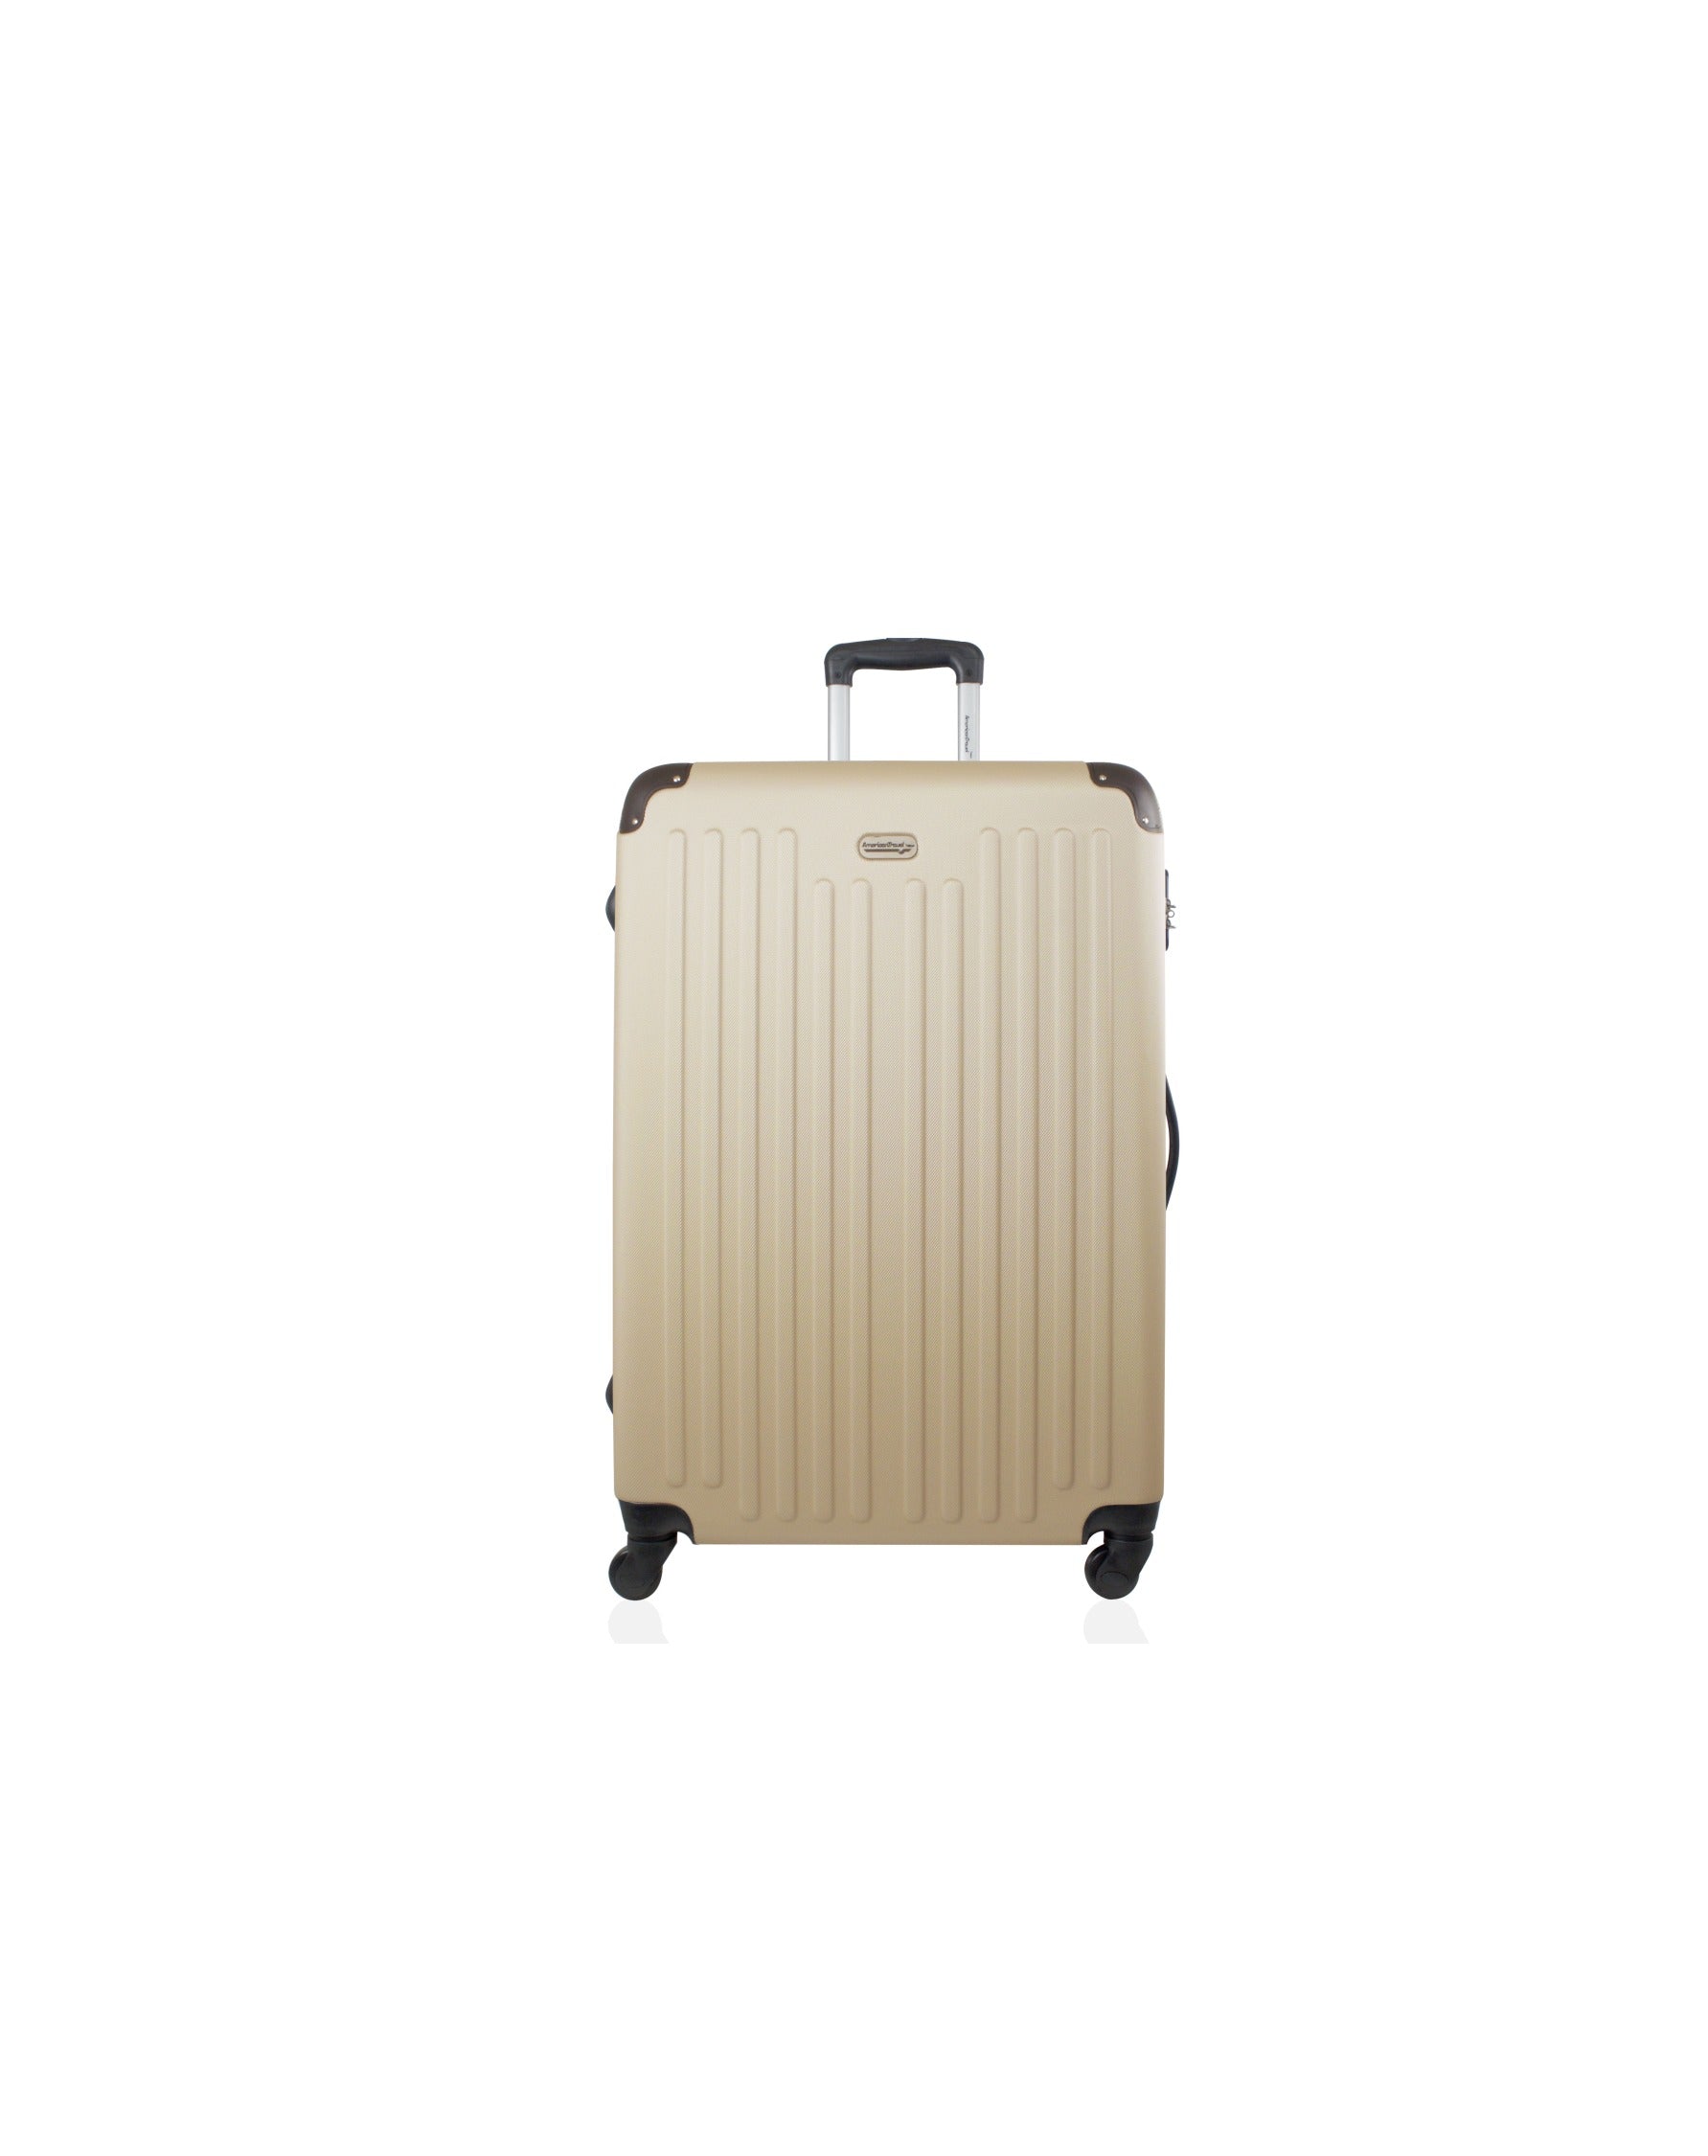 Valise Cabine ABS Little Italie-E 4 Roues 50 cm I American Travel